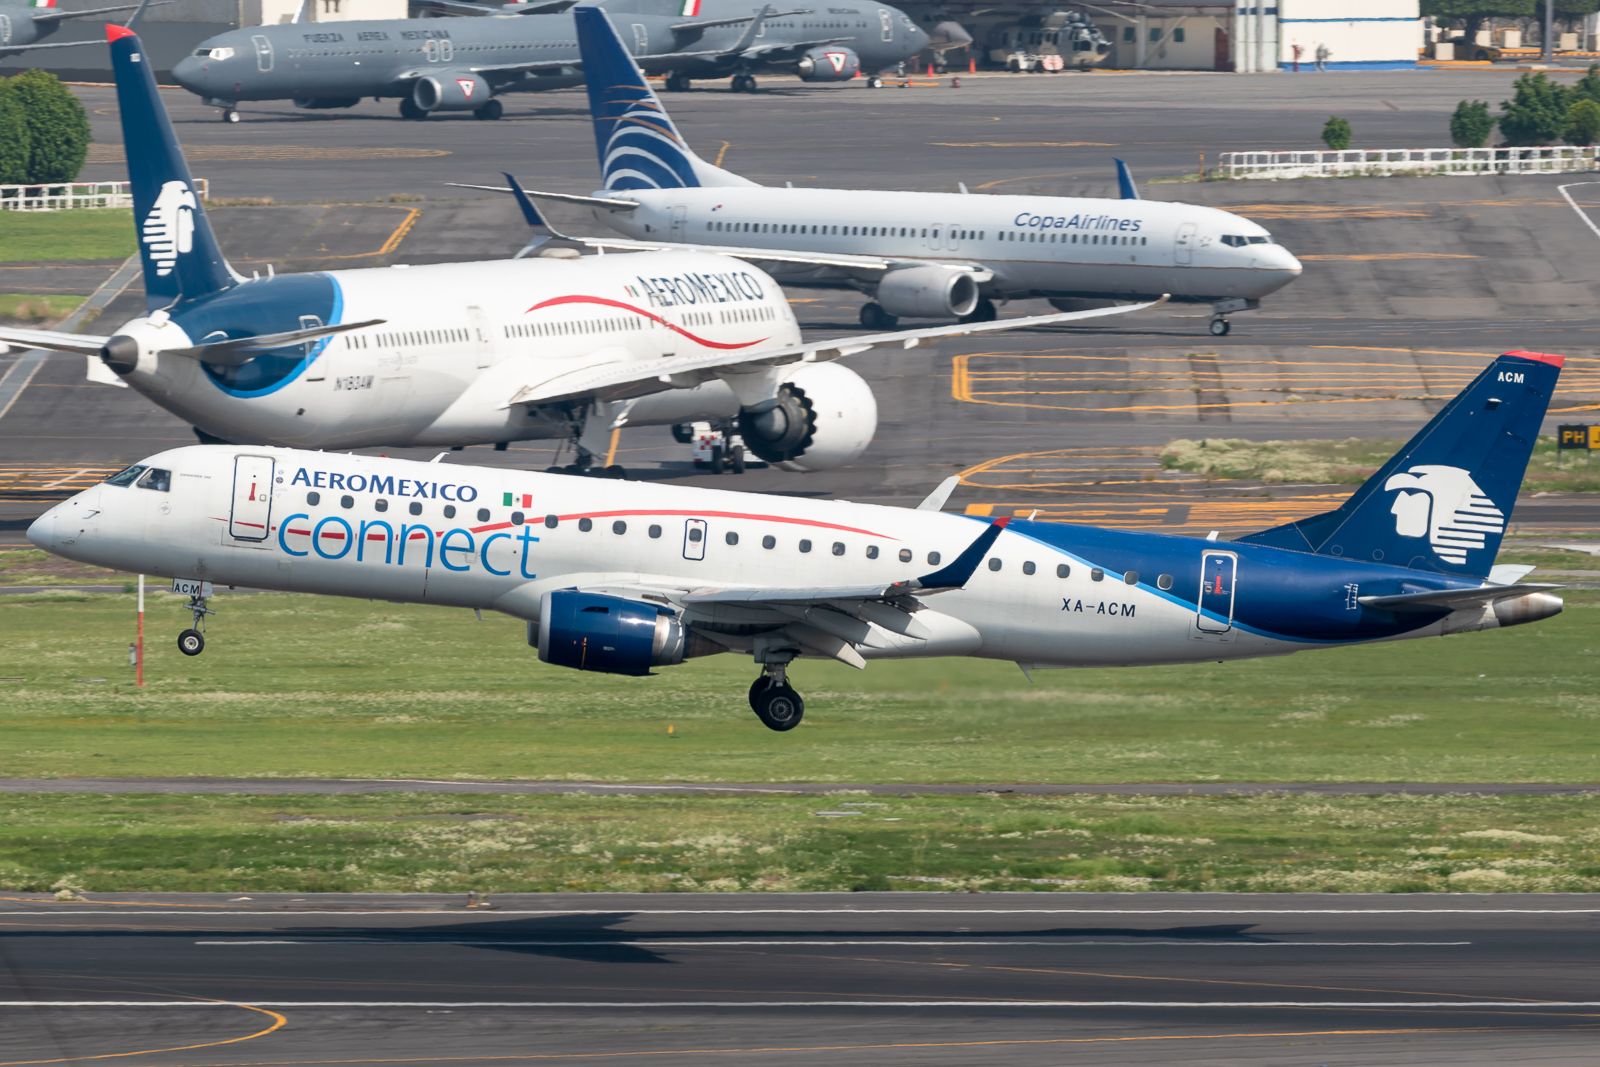 An Aeroméxico Connect Embraer ERJ-190-100LR flying in front of Aeroméxico and CopaAirlines aircraft.